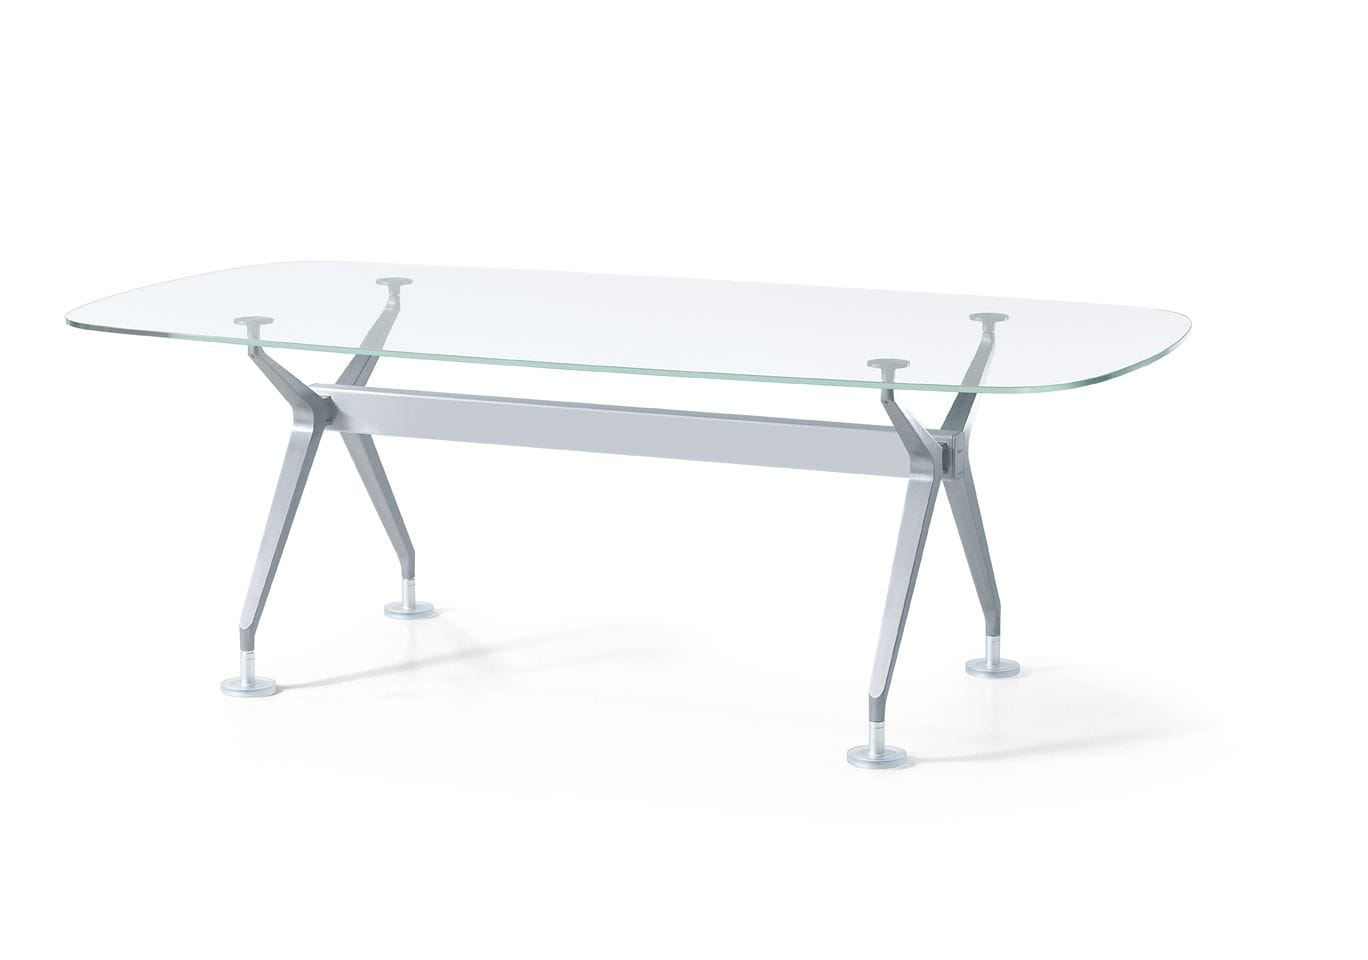 Silver table system by Interstuhl